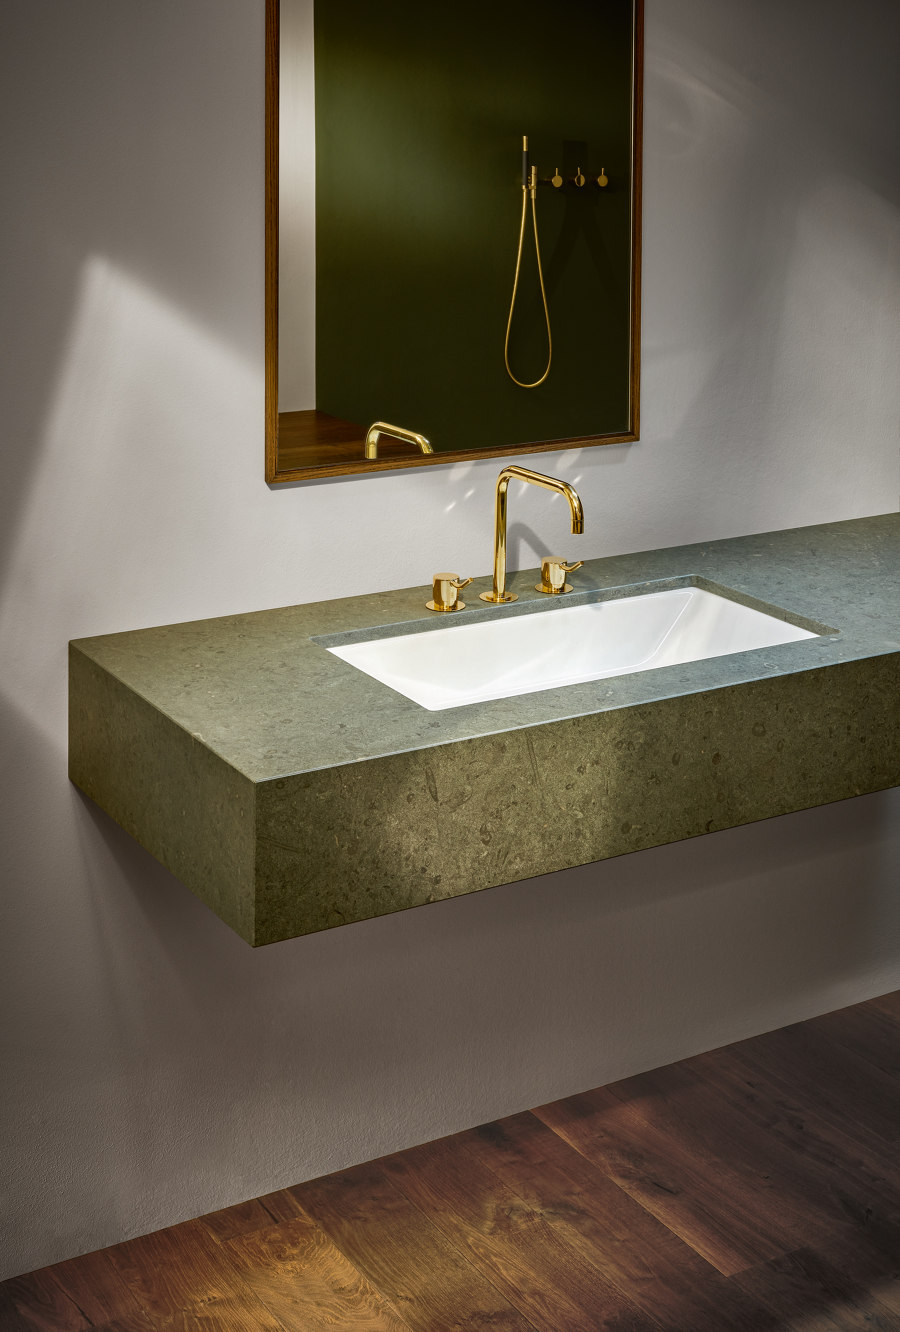 Everything flows: Baths from BETTE | News